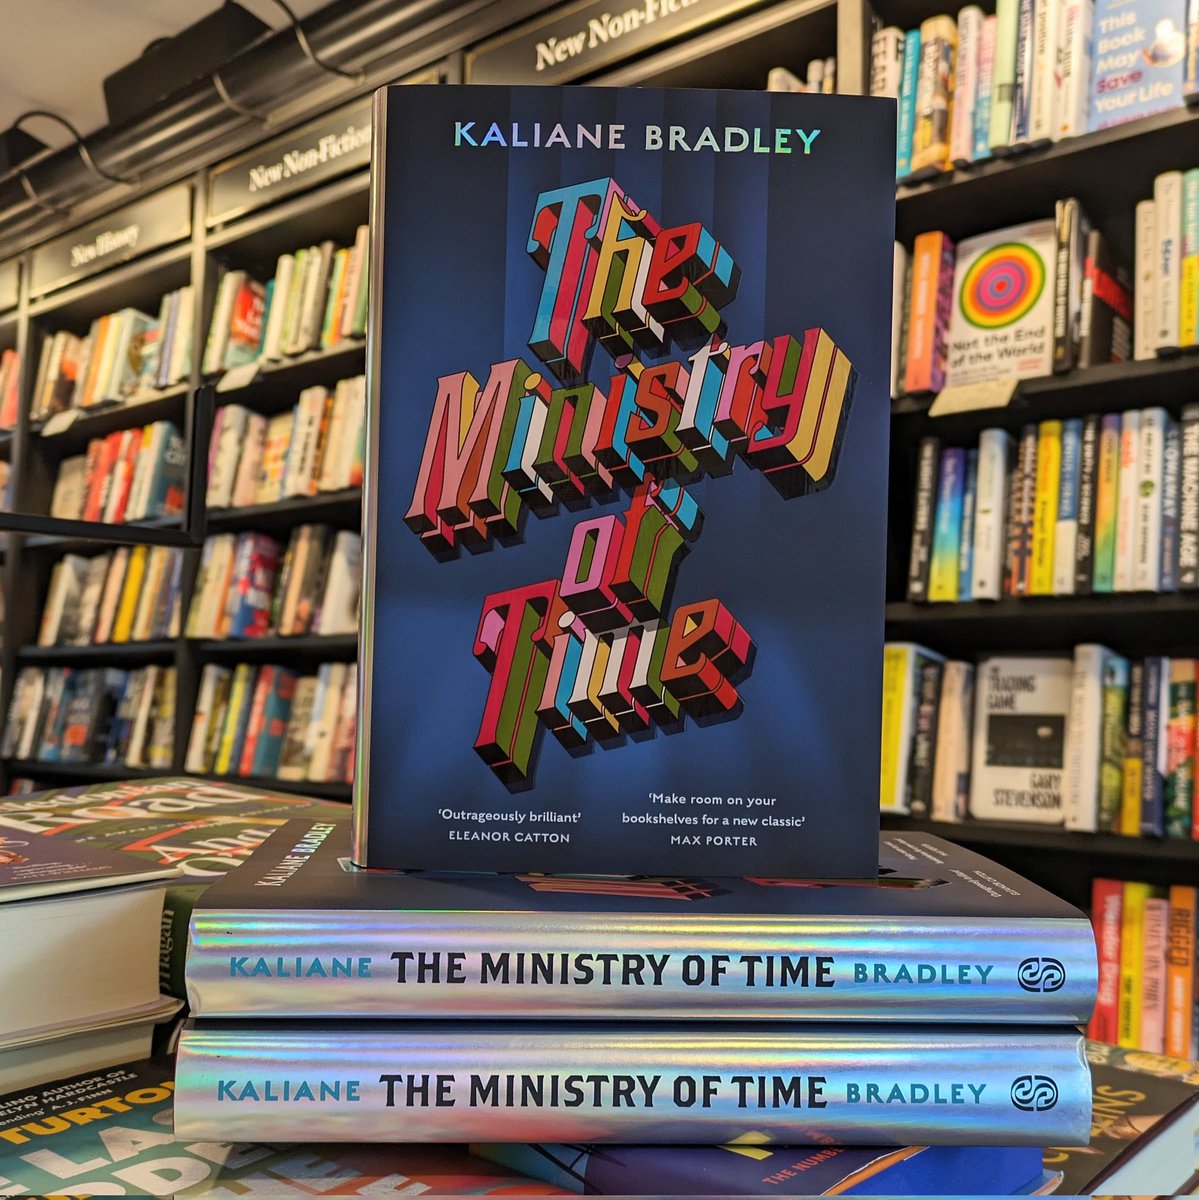 Boy meets girl. Past meets future. A finger meets a trigger. Beginning meets ends. England is forever. England must fall.

A time-travelling thriller of a love story that defies easy definition, we know you'll love this!
#waterstones #theministryoftime #kalianebradley